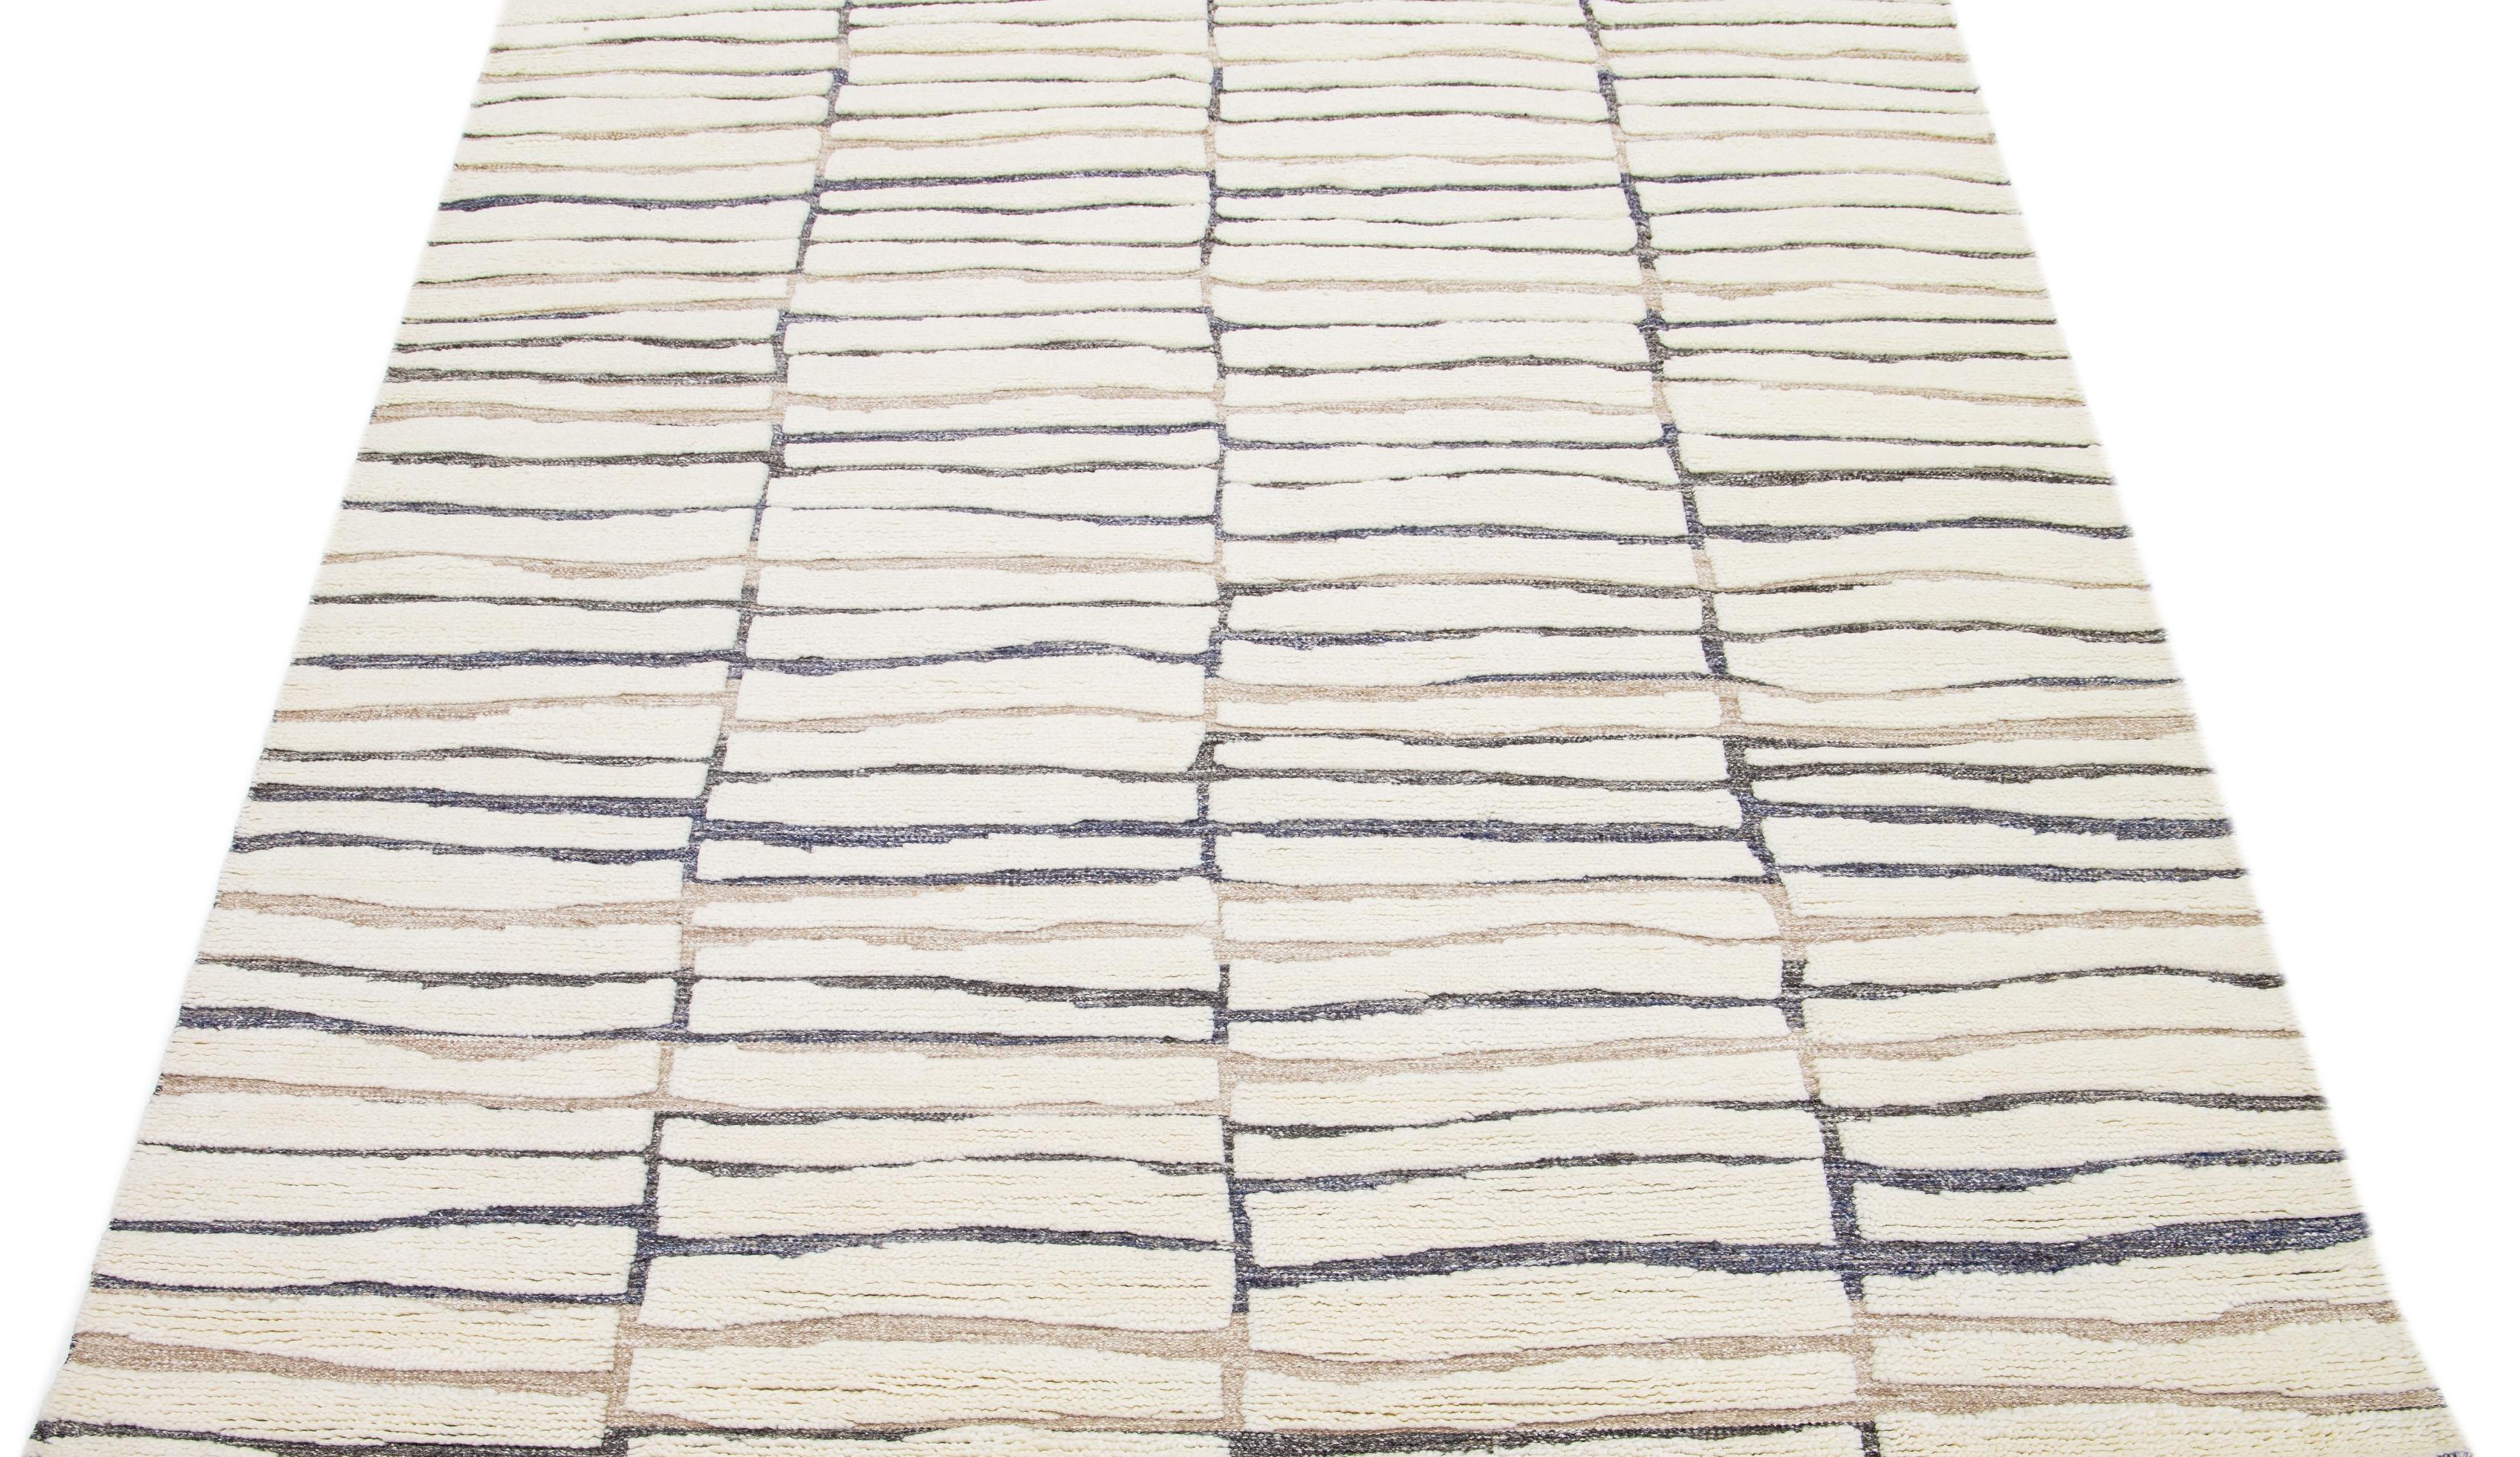 Featuring a contemporary Moroccan design, this meticulously crafted wool rug effortlessly highlights a serene Ivory shade. Complemented by a captivating brown and gray backdrop, these harmoniously blended colors form a flawless abstract composition